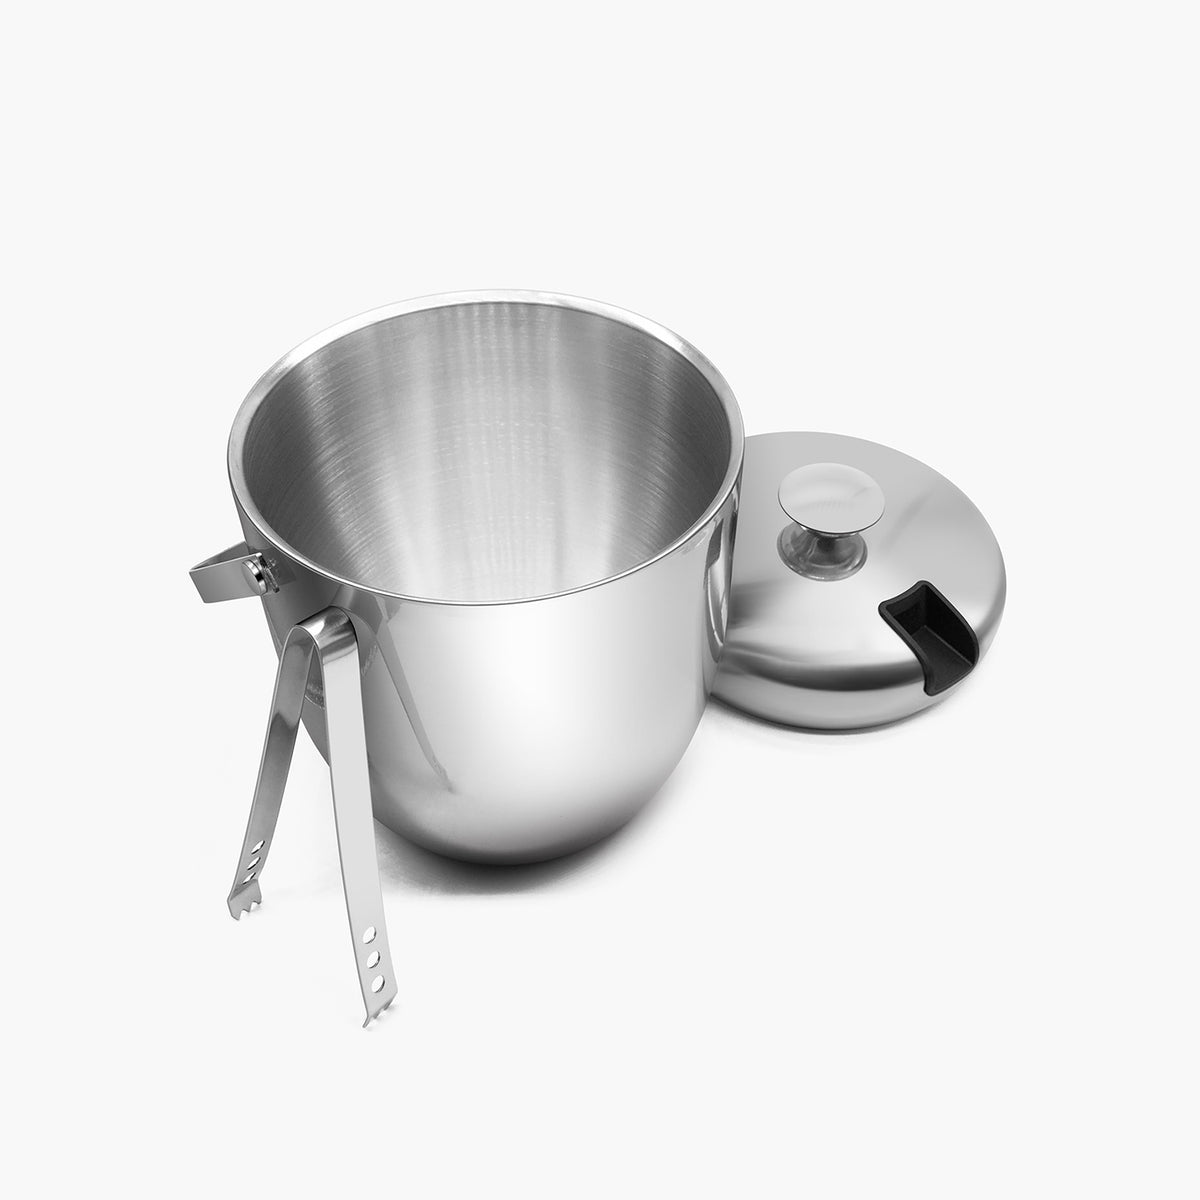 Fortune Candy 4-Quart Saucepan with Lid, Tri-Ply, 18/8 Stainless Steel,  Advanced Welding Technology, Mirror Finish